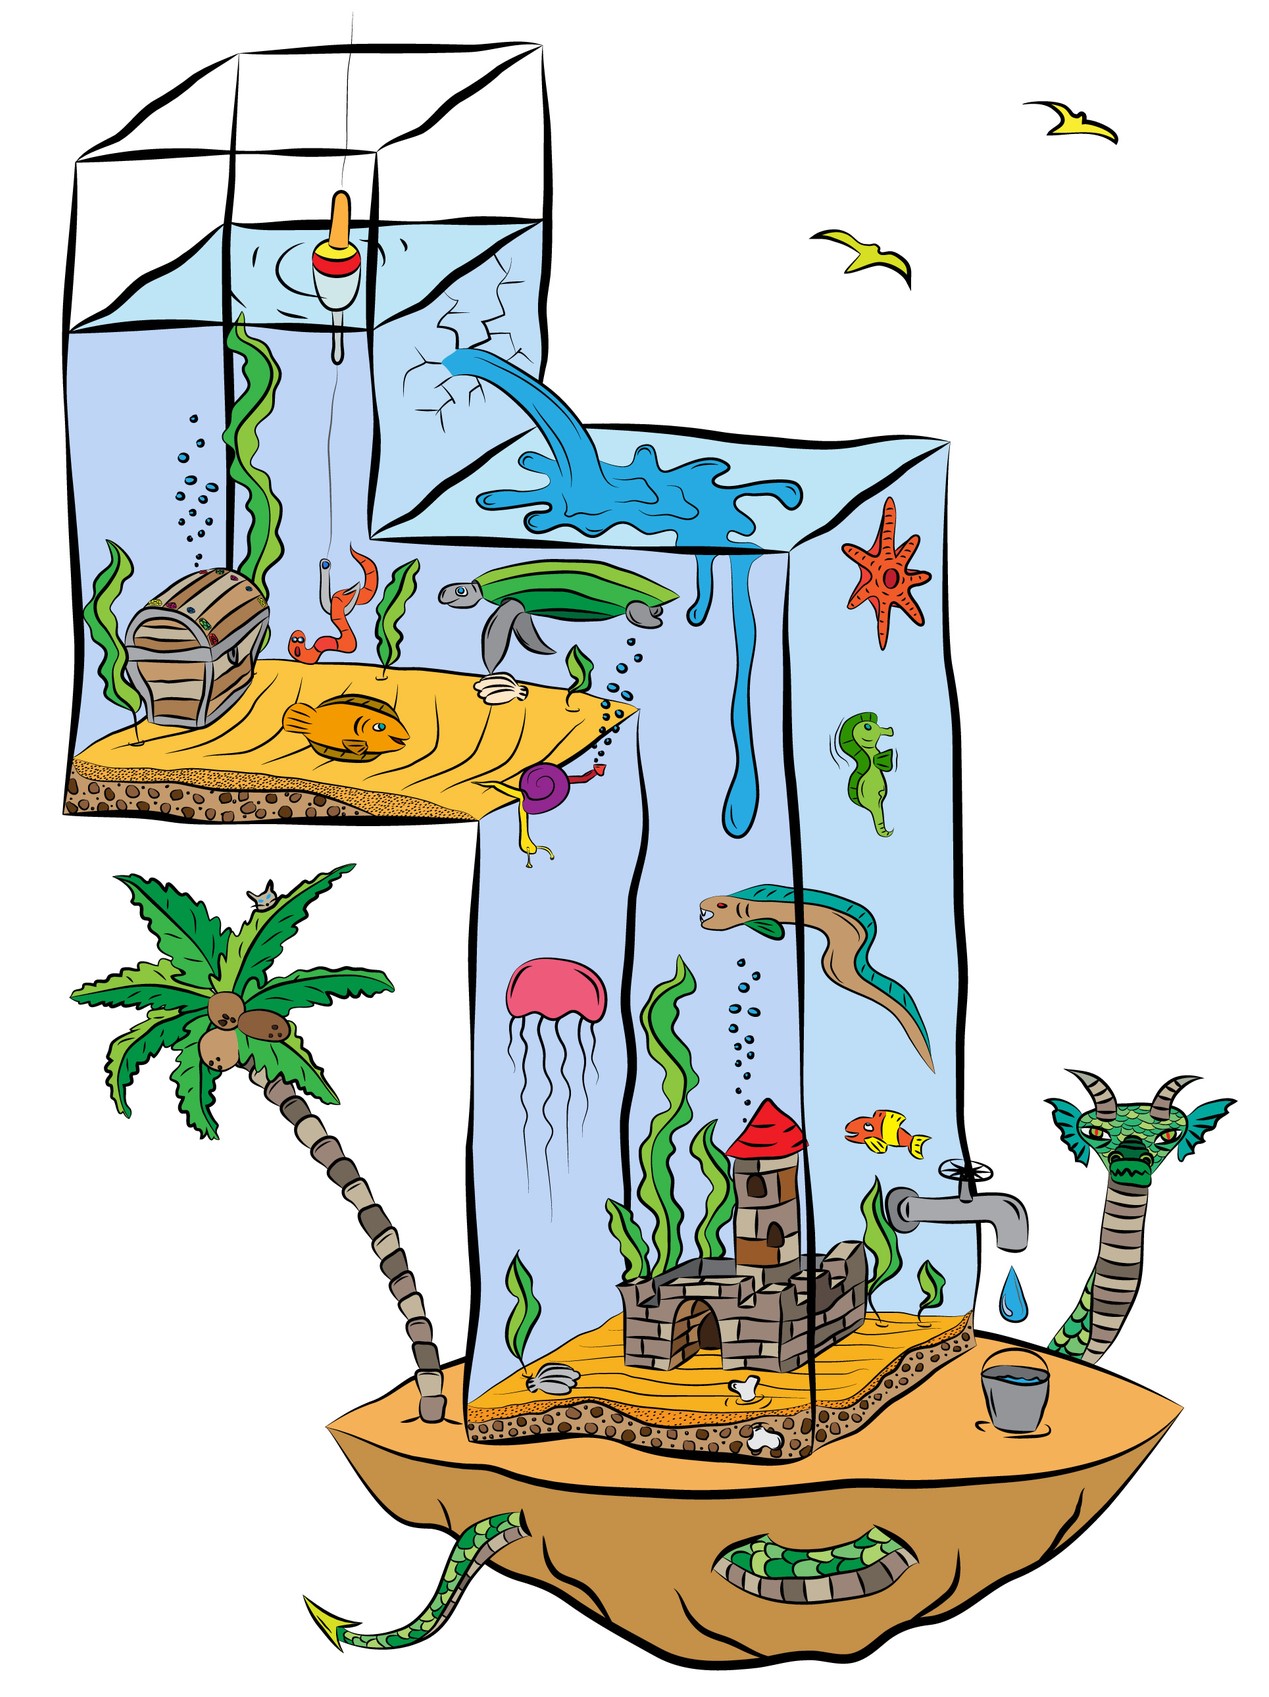 "4" shaped aquarium of earth and water and fish and plants